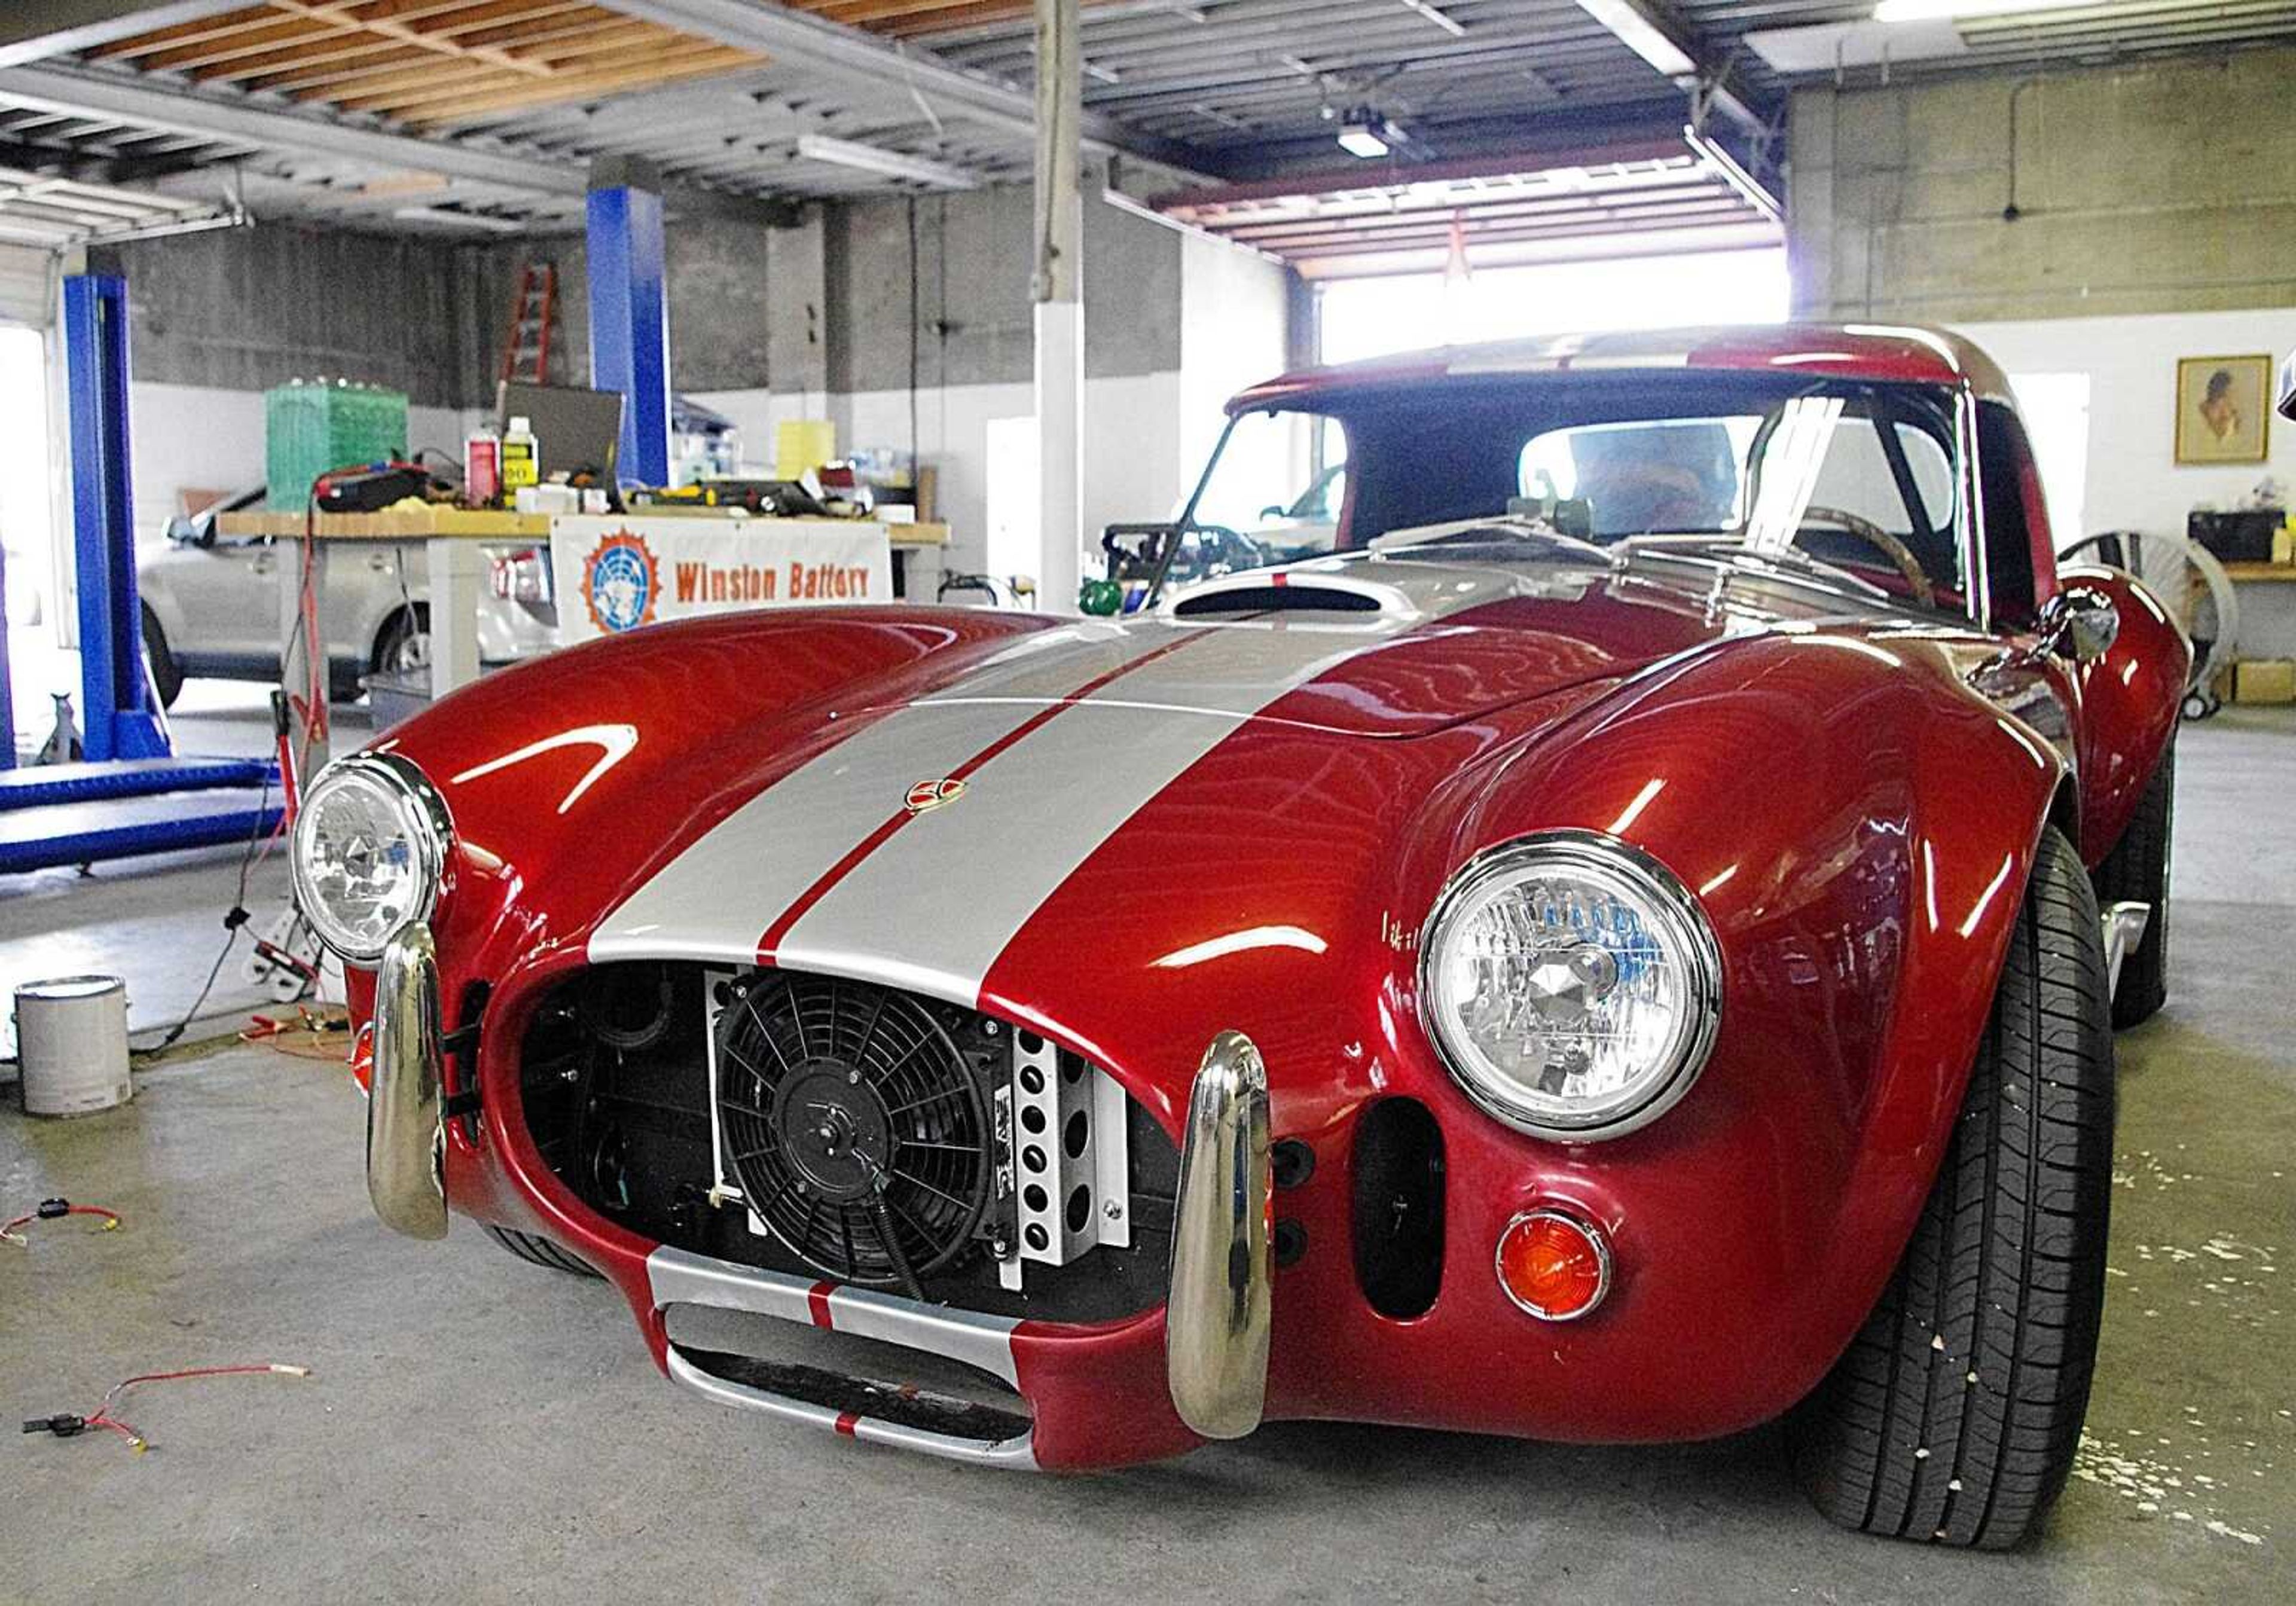 A replica Shelby Cobra converted to run on electricity. Photo by Nathan Hamilton